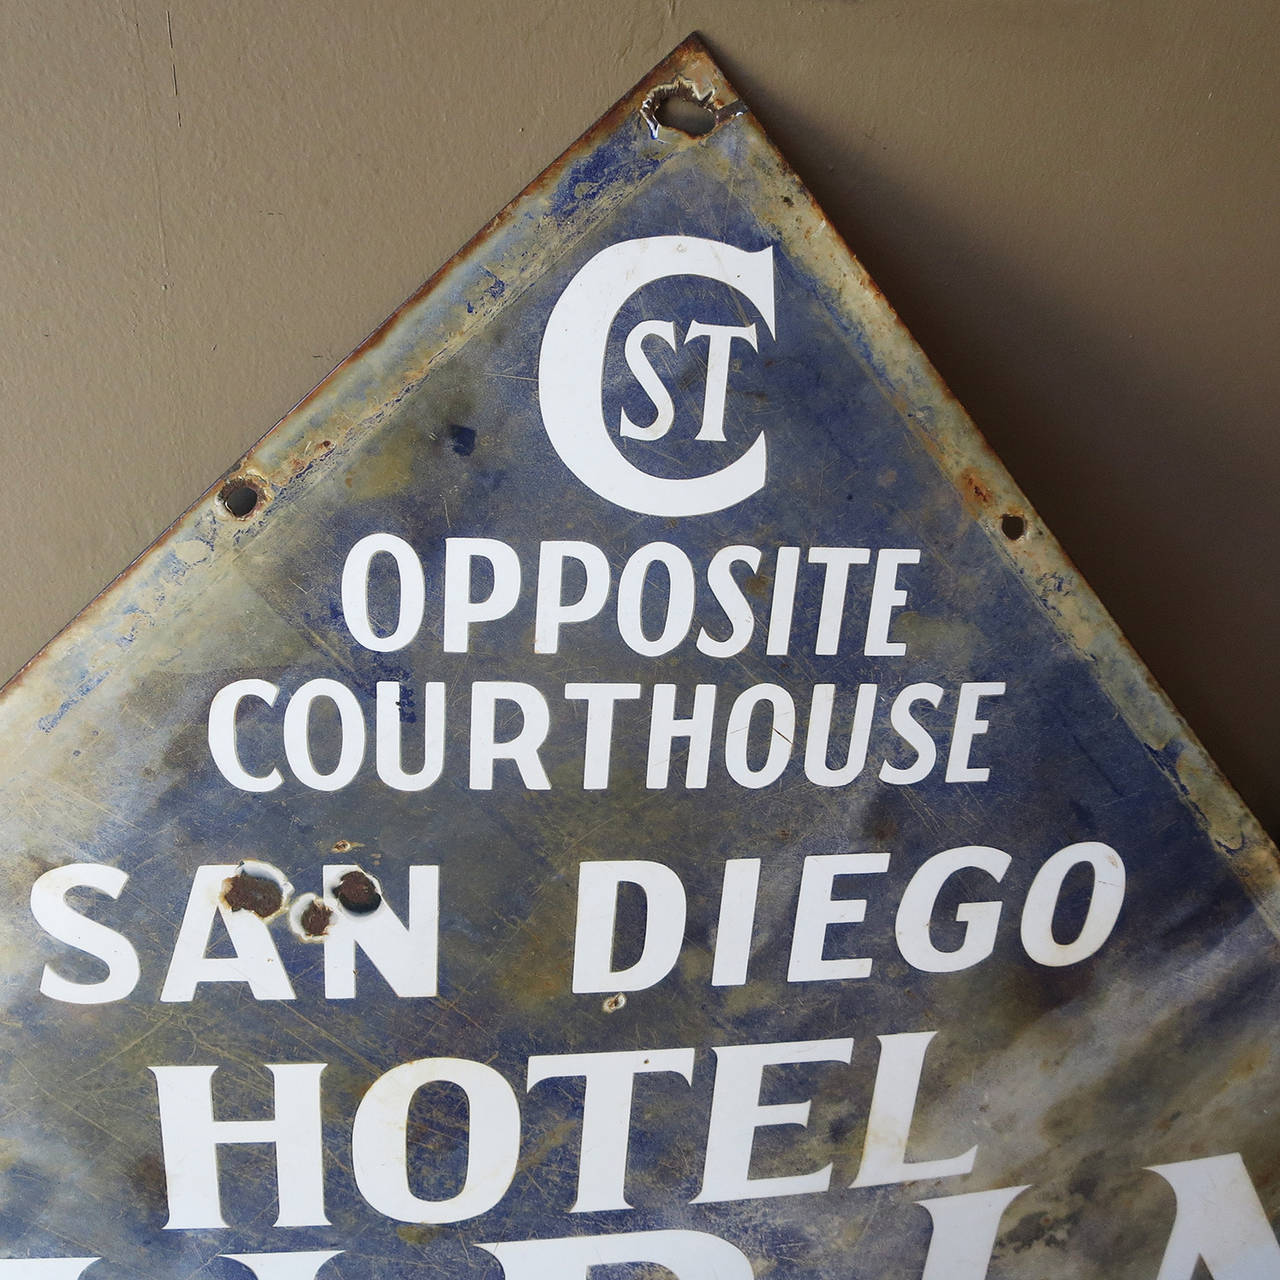 Opened in 1915, the Hotel Lubin of San Diego, California promised visitors to be 